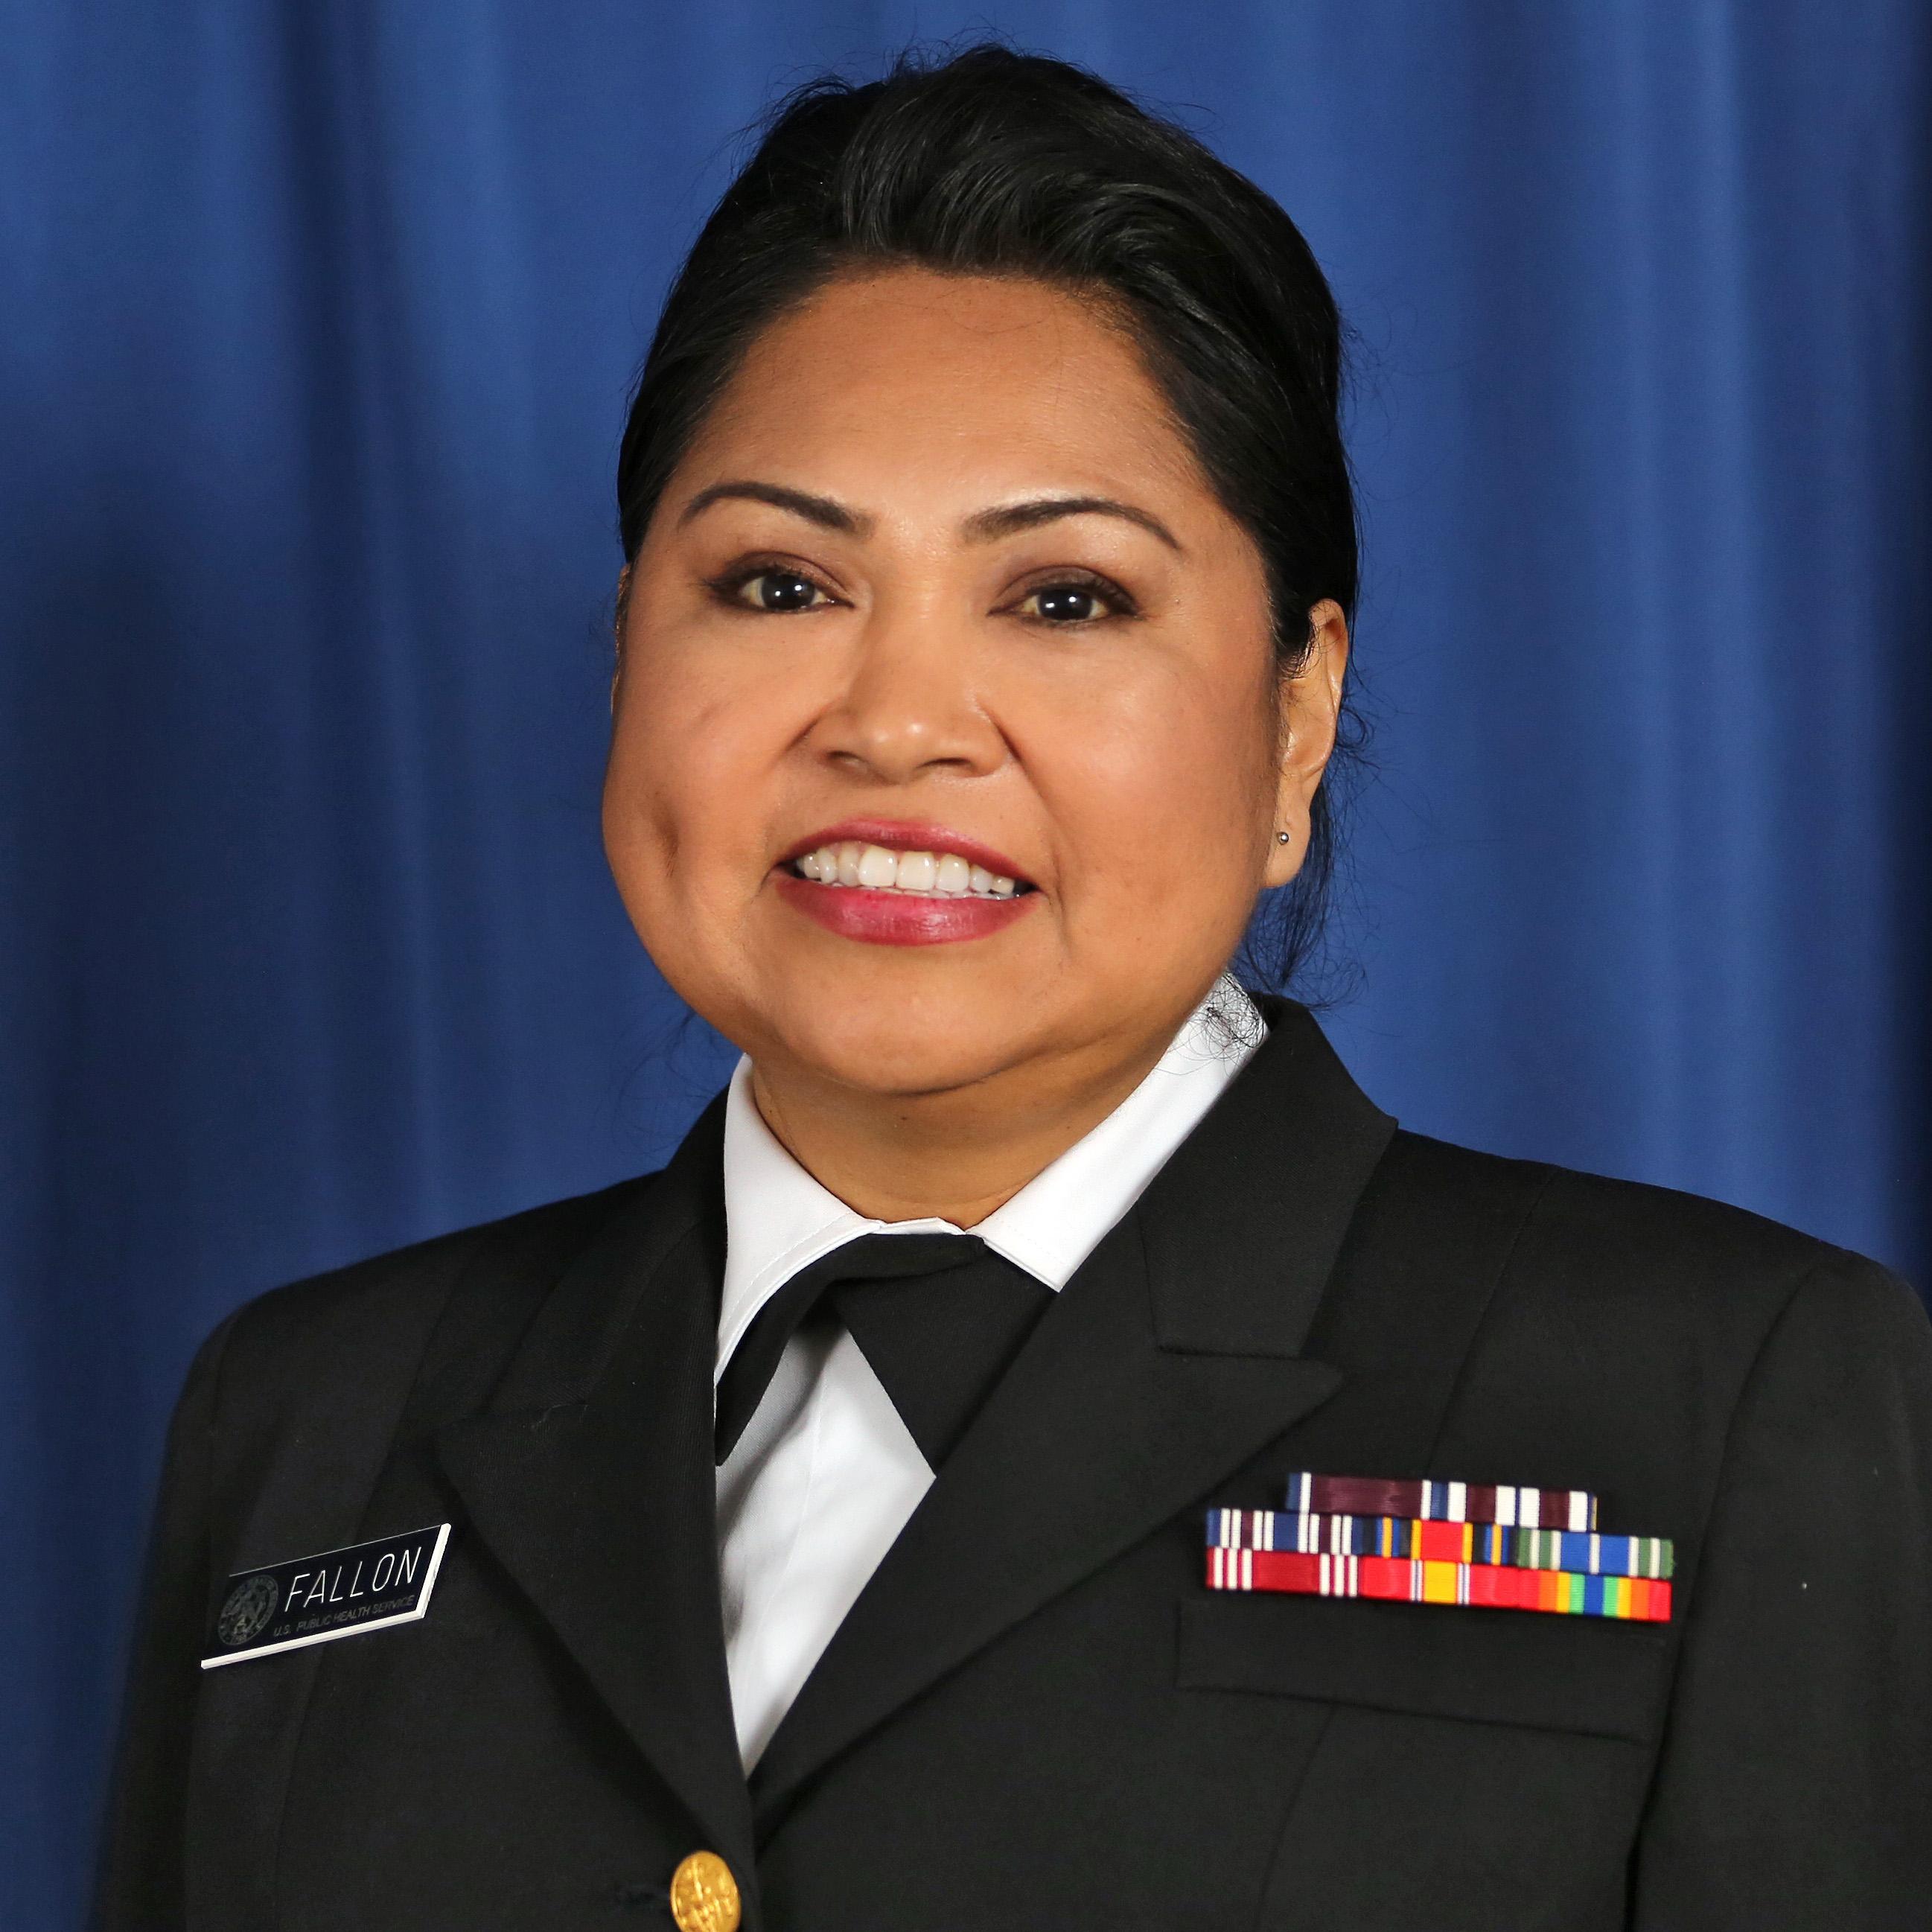 Cmdr. Angela Fallon, Deputy Director, Office of Clinical and Preventive Services